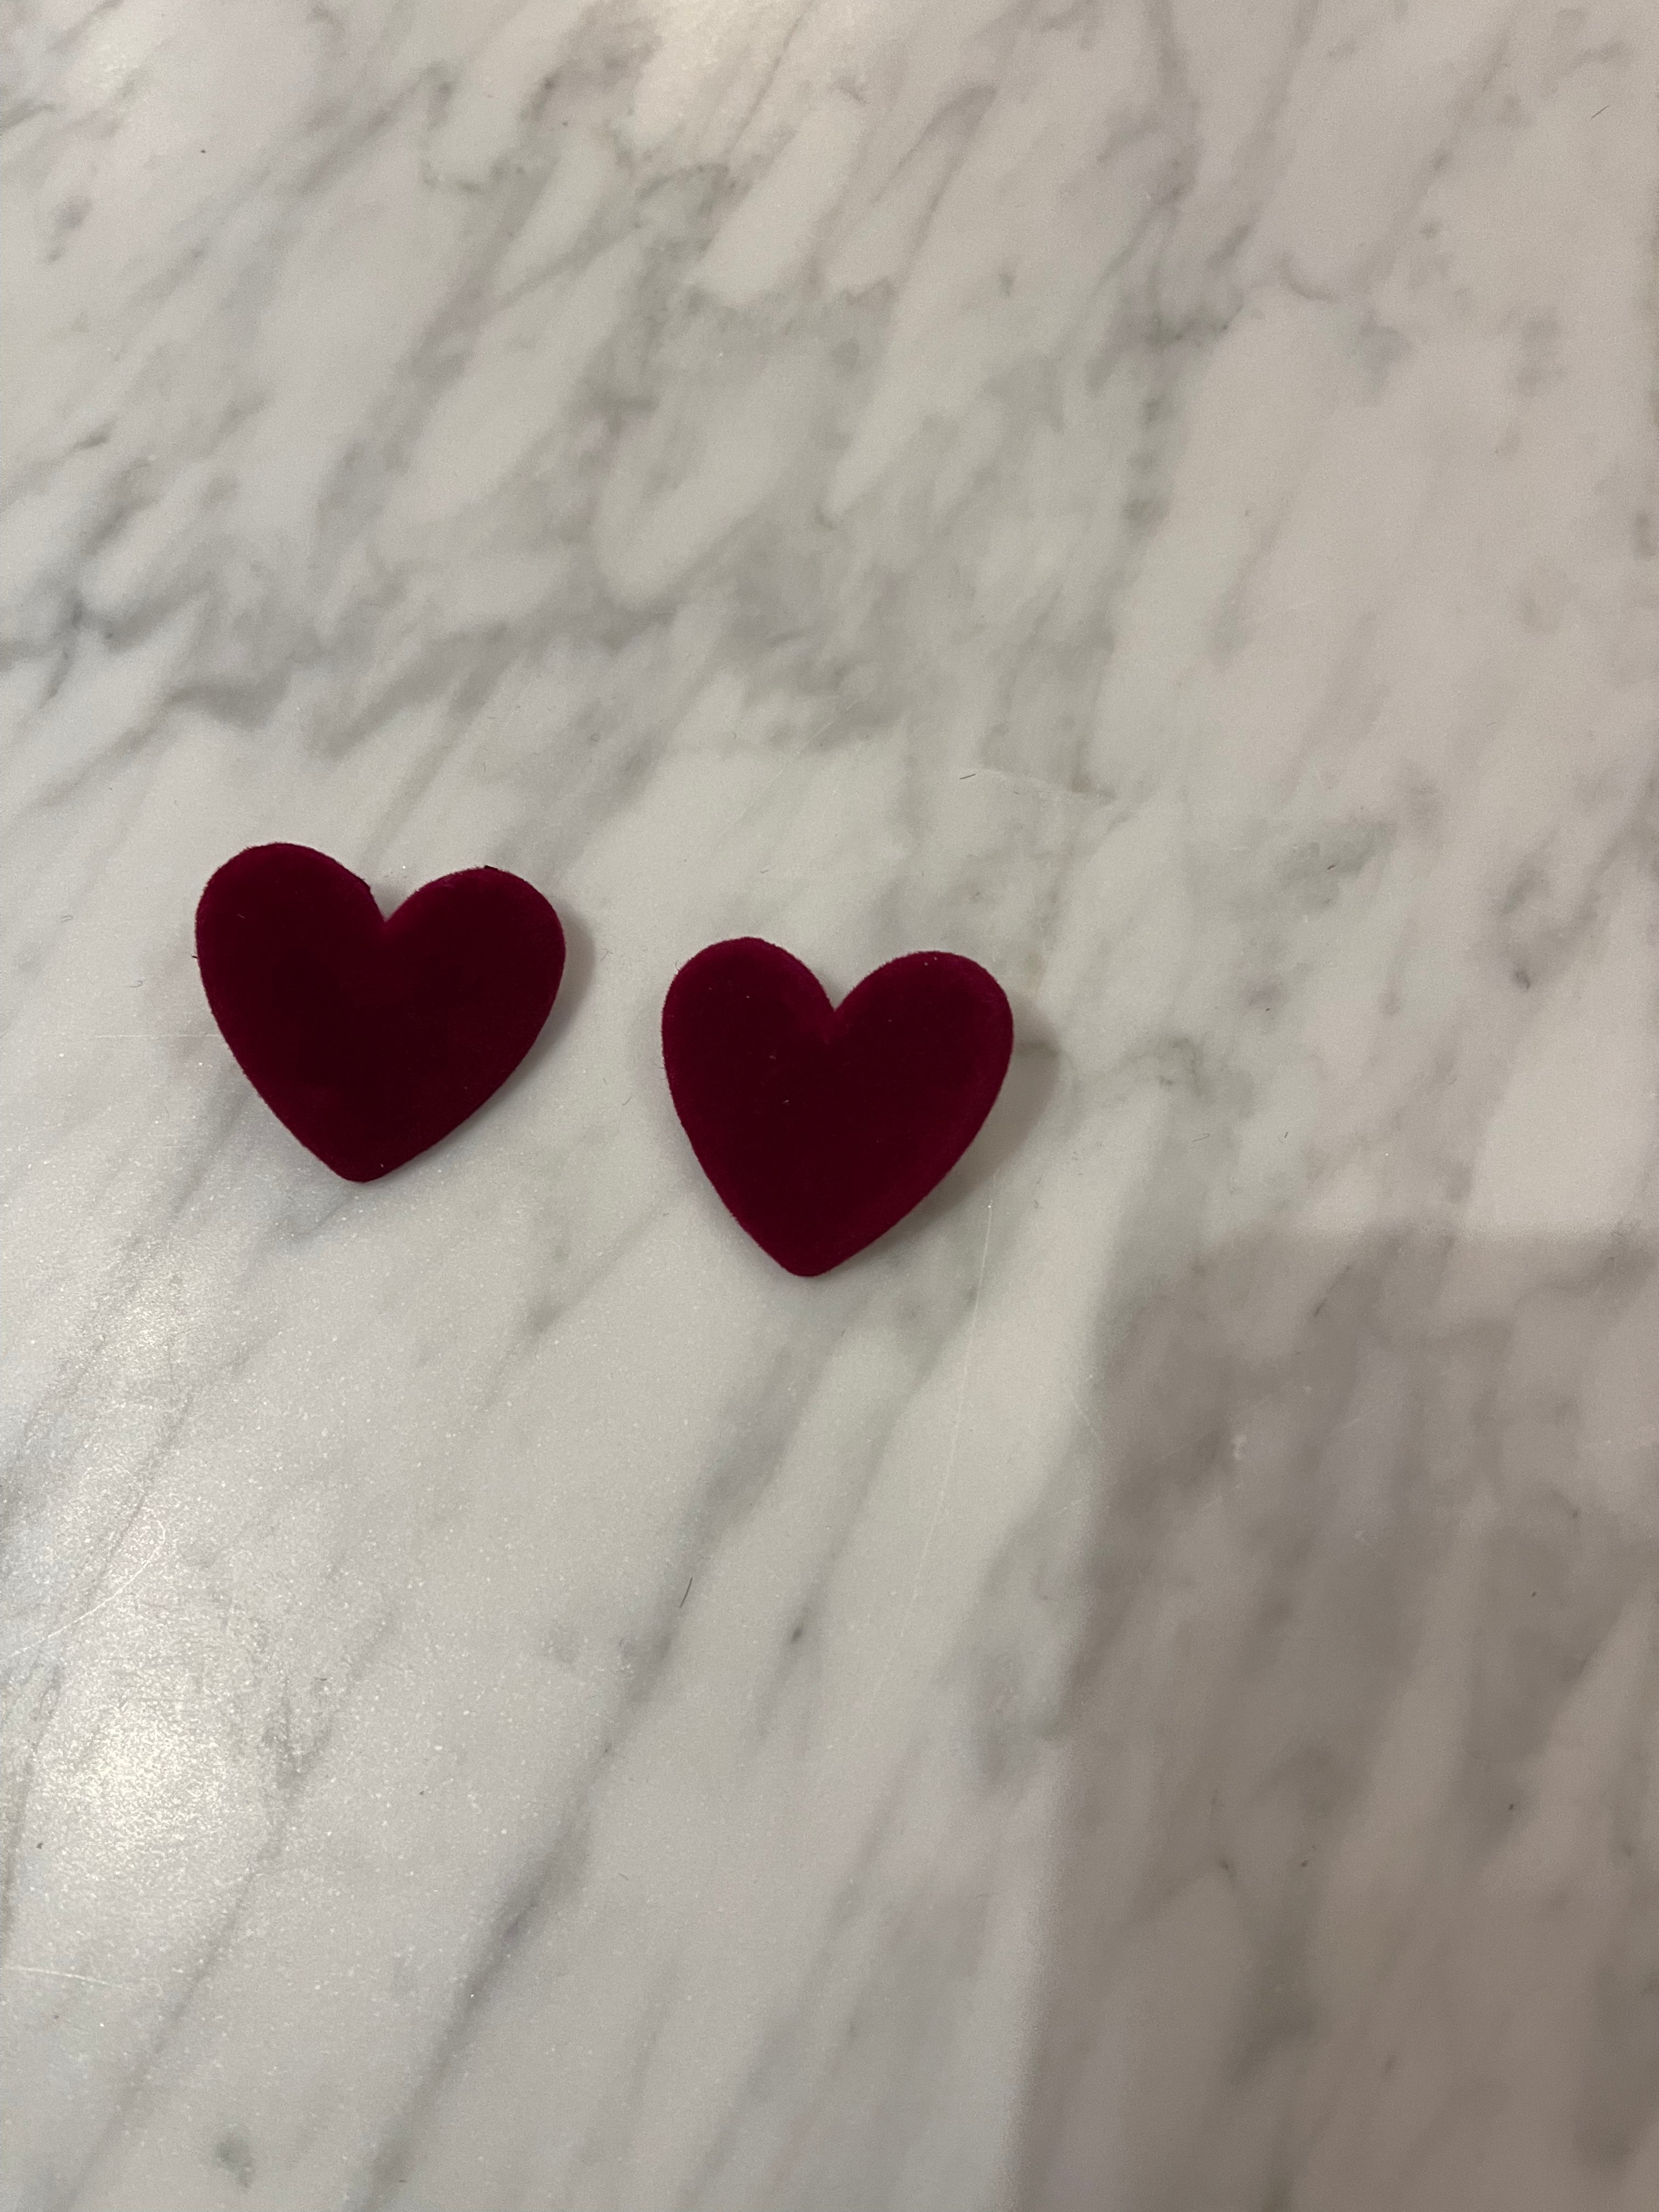 Heart on clips